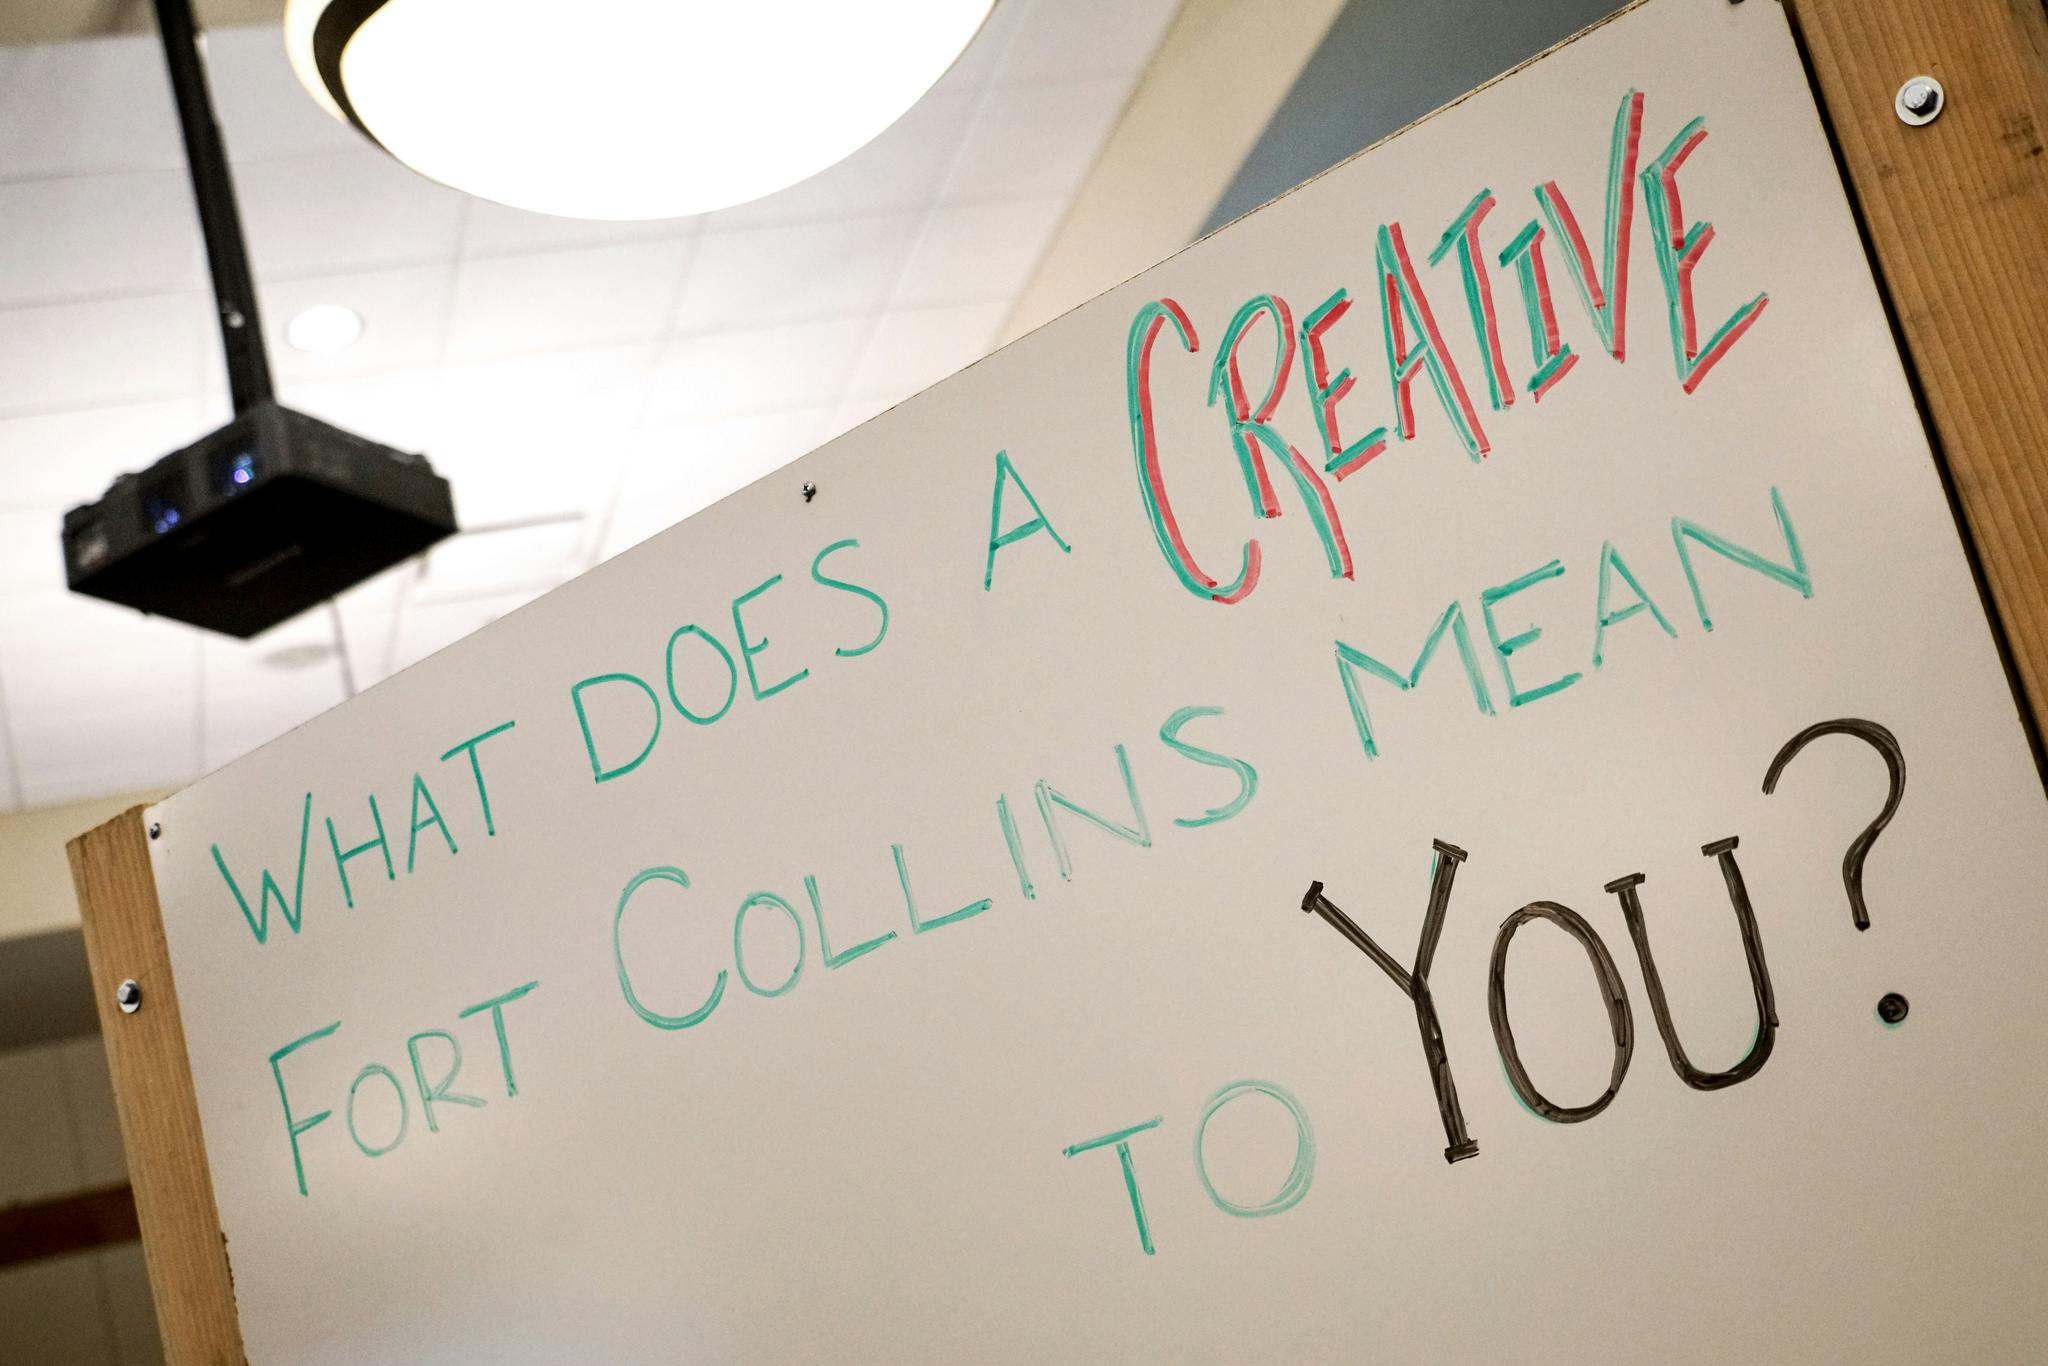 What does a creative Fort Collins mean to you?